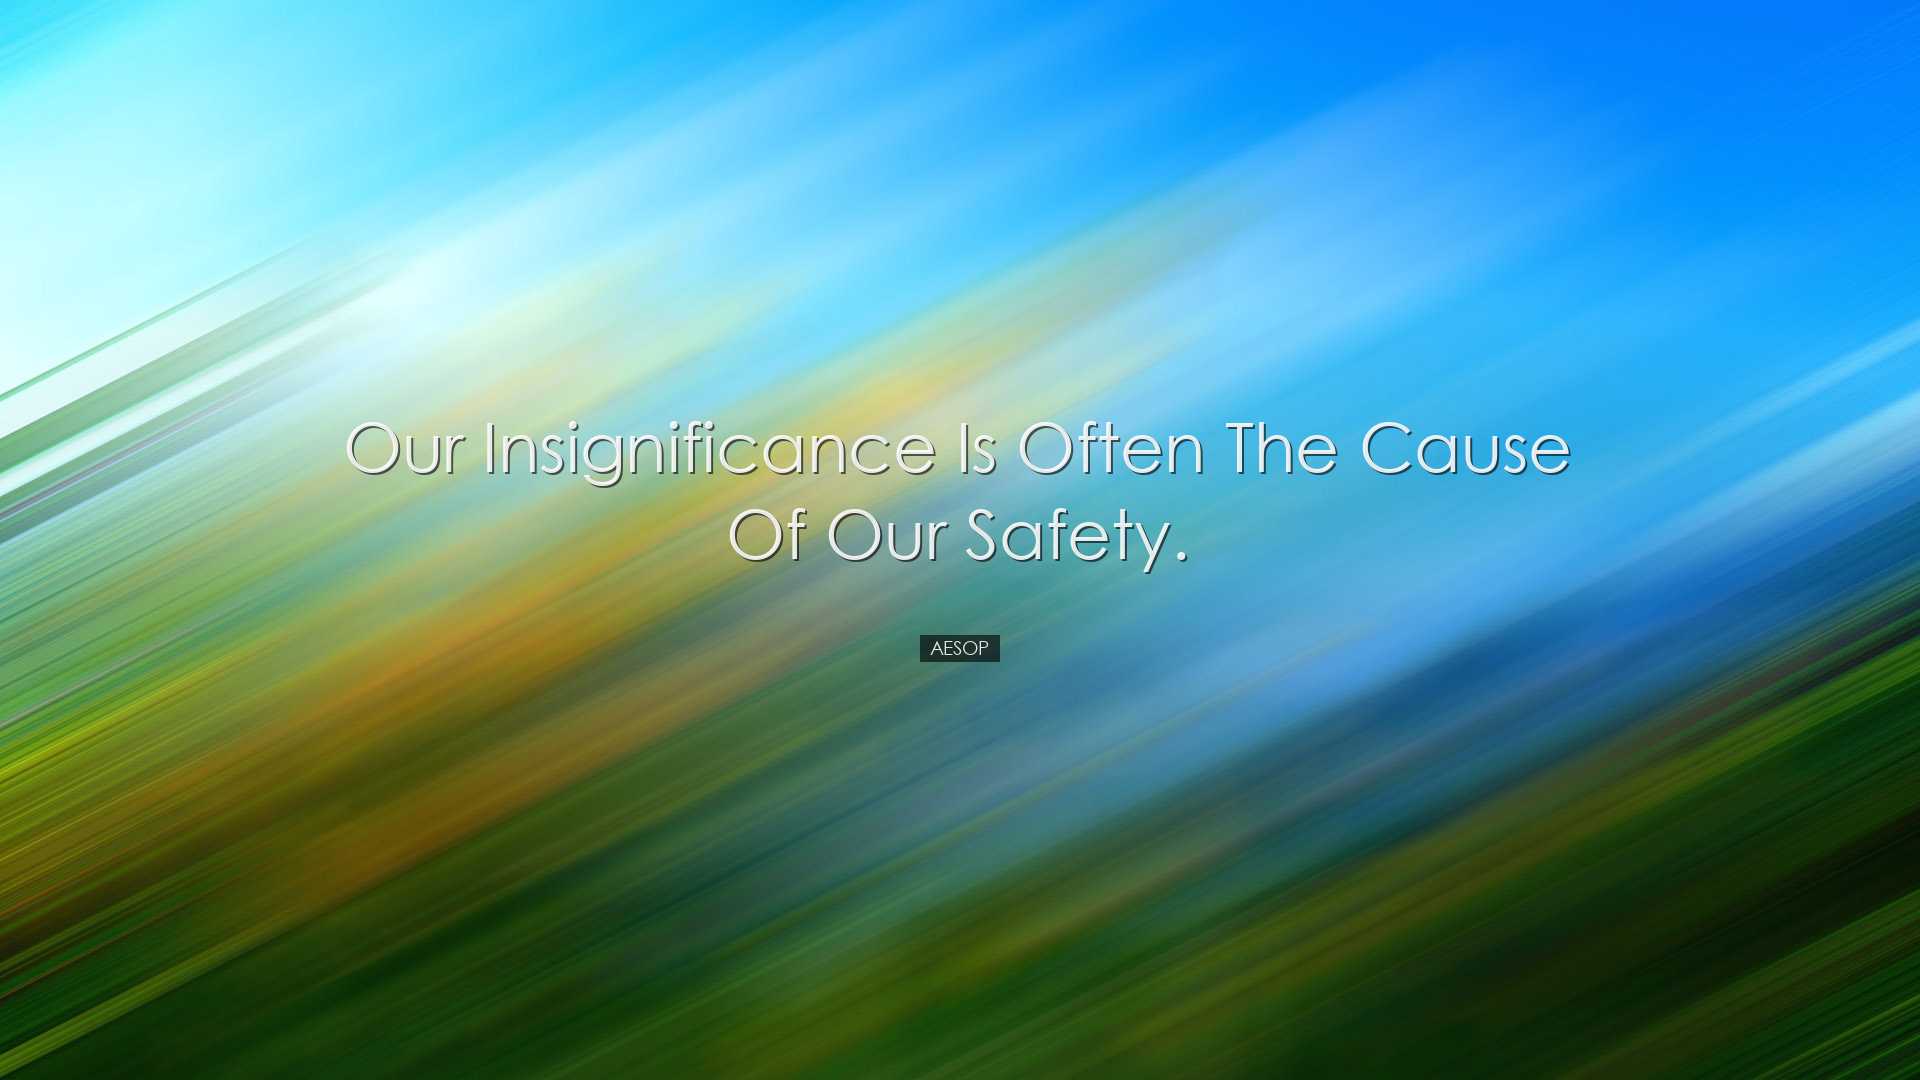 Our insignificance is often the cause of our safety. - Aesop